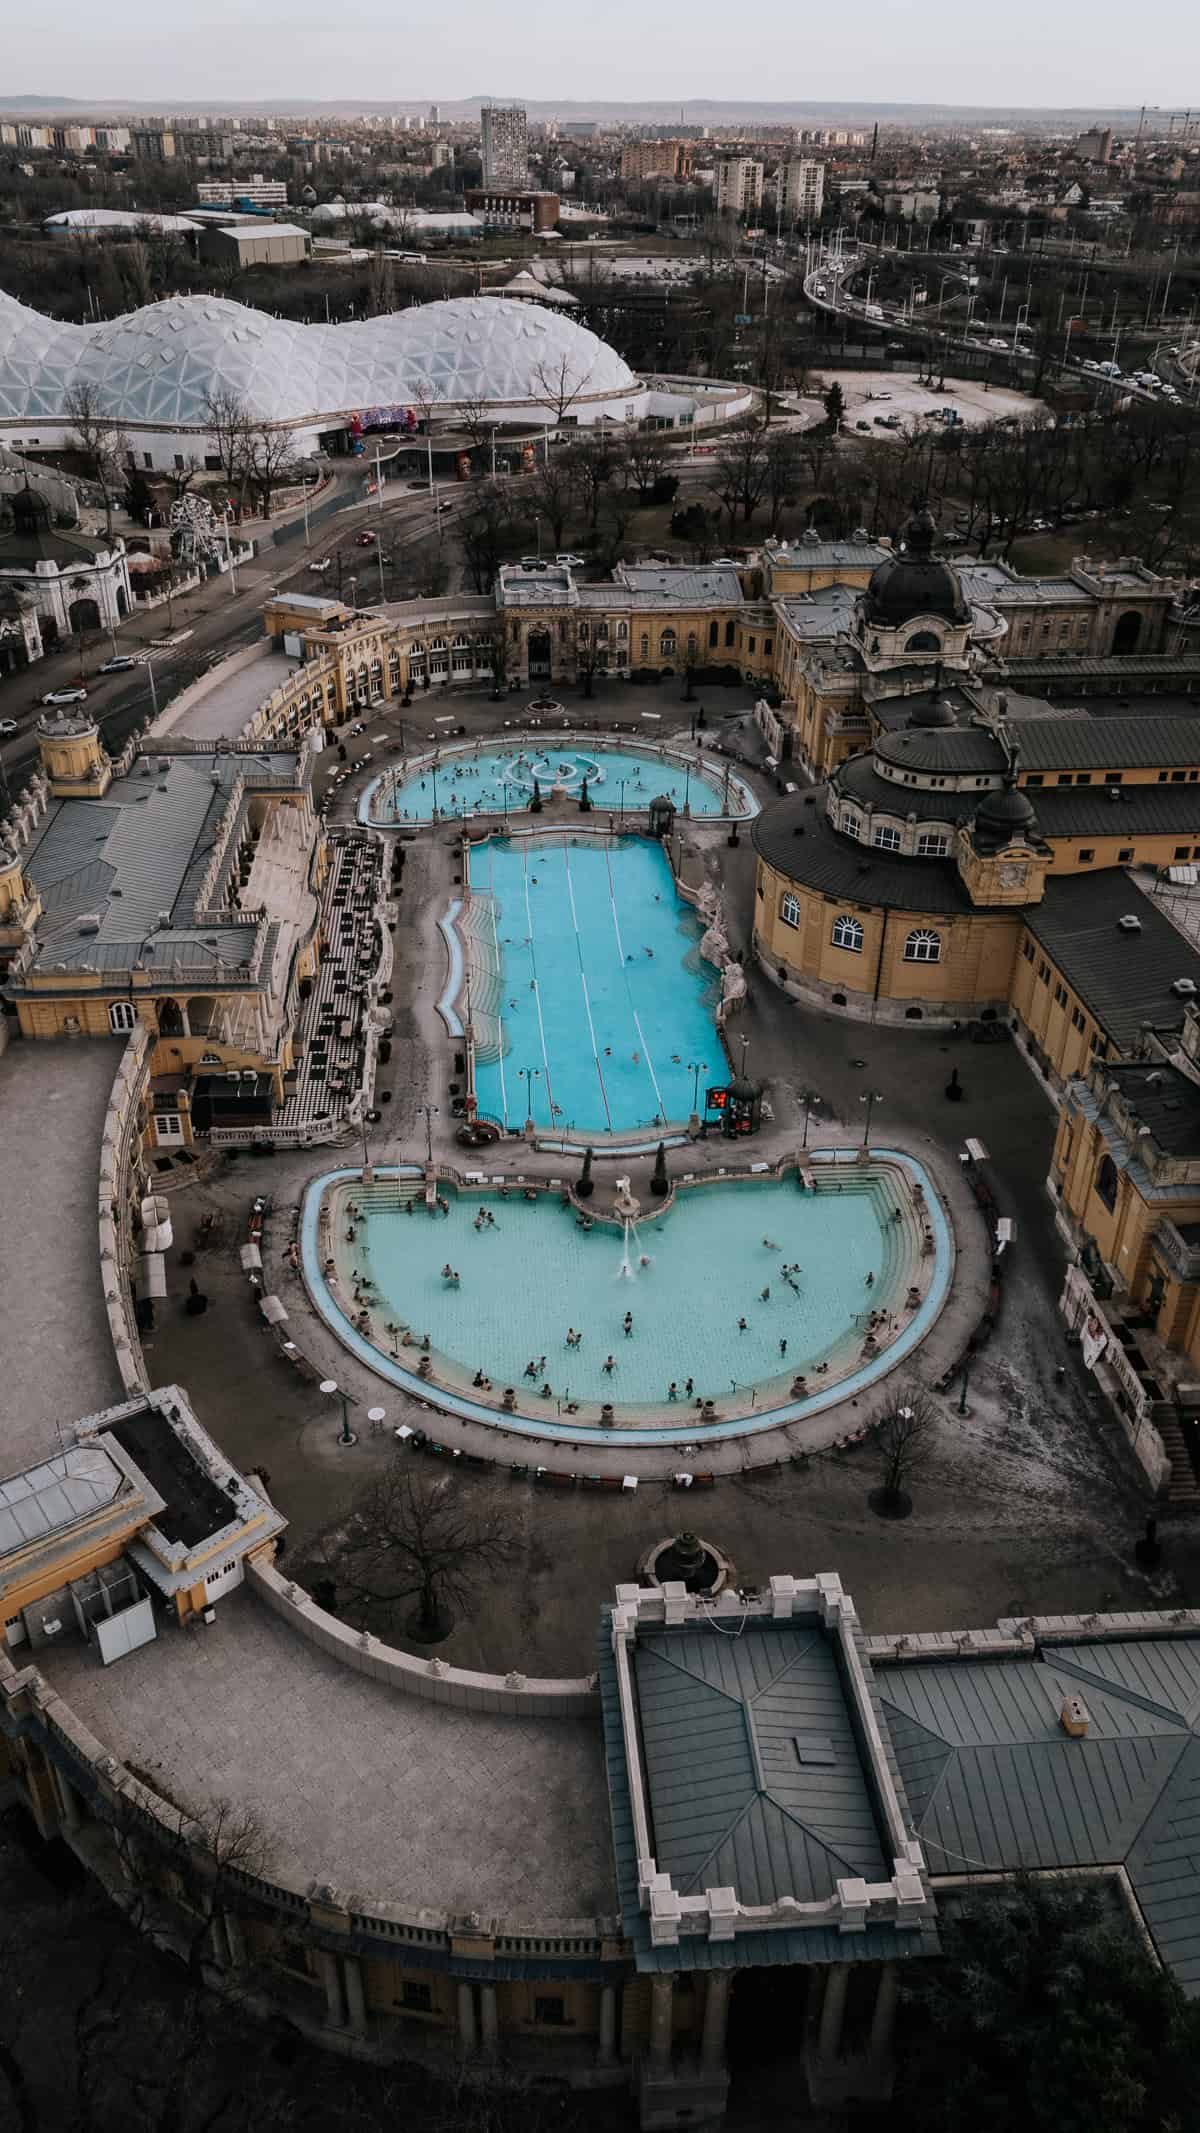 An aerial view of the Széchenyi Thermal Bath in Budapest, featuring its three large outdoor pools with people swimming and relaxing, surrounded by historic yellow buildings